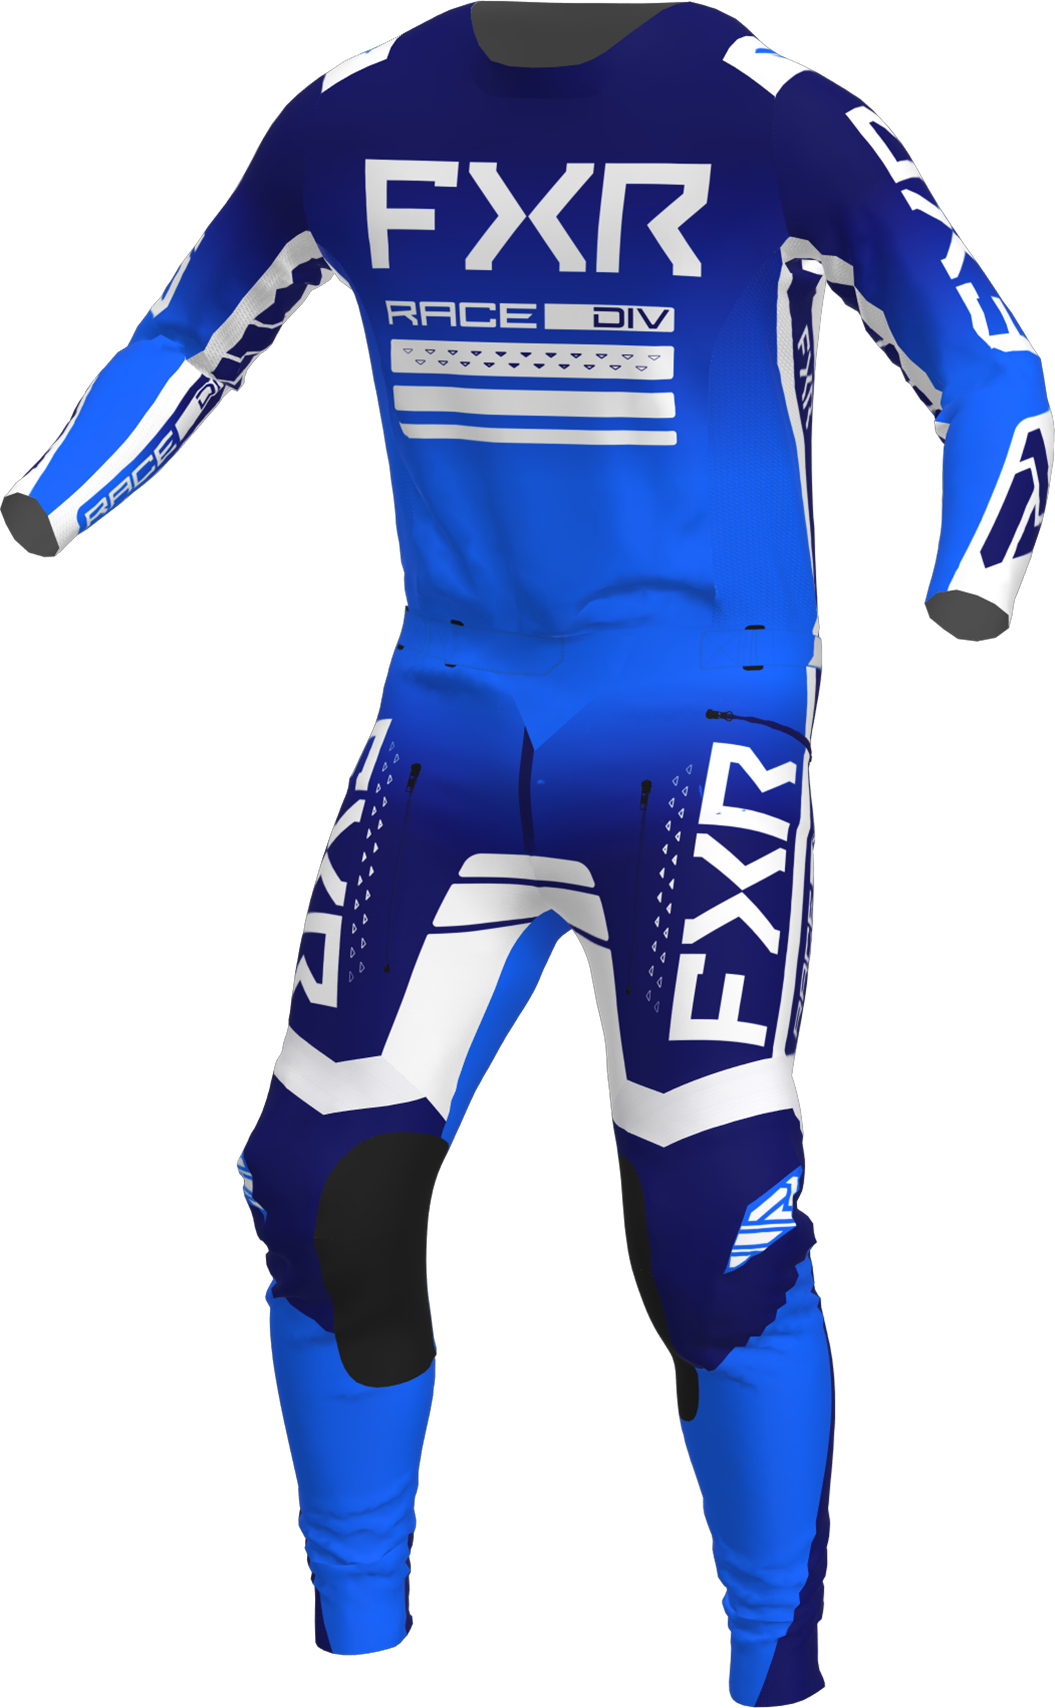 A 3D image of FXR's Contender MX Jersey and Pant in Navy/Blue colorway